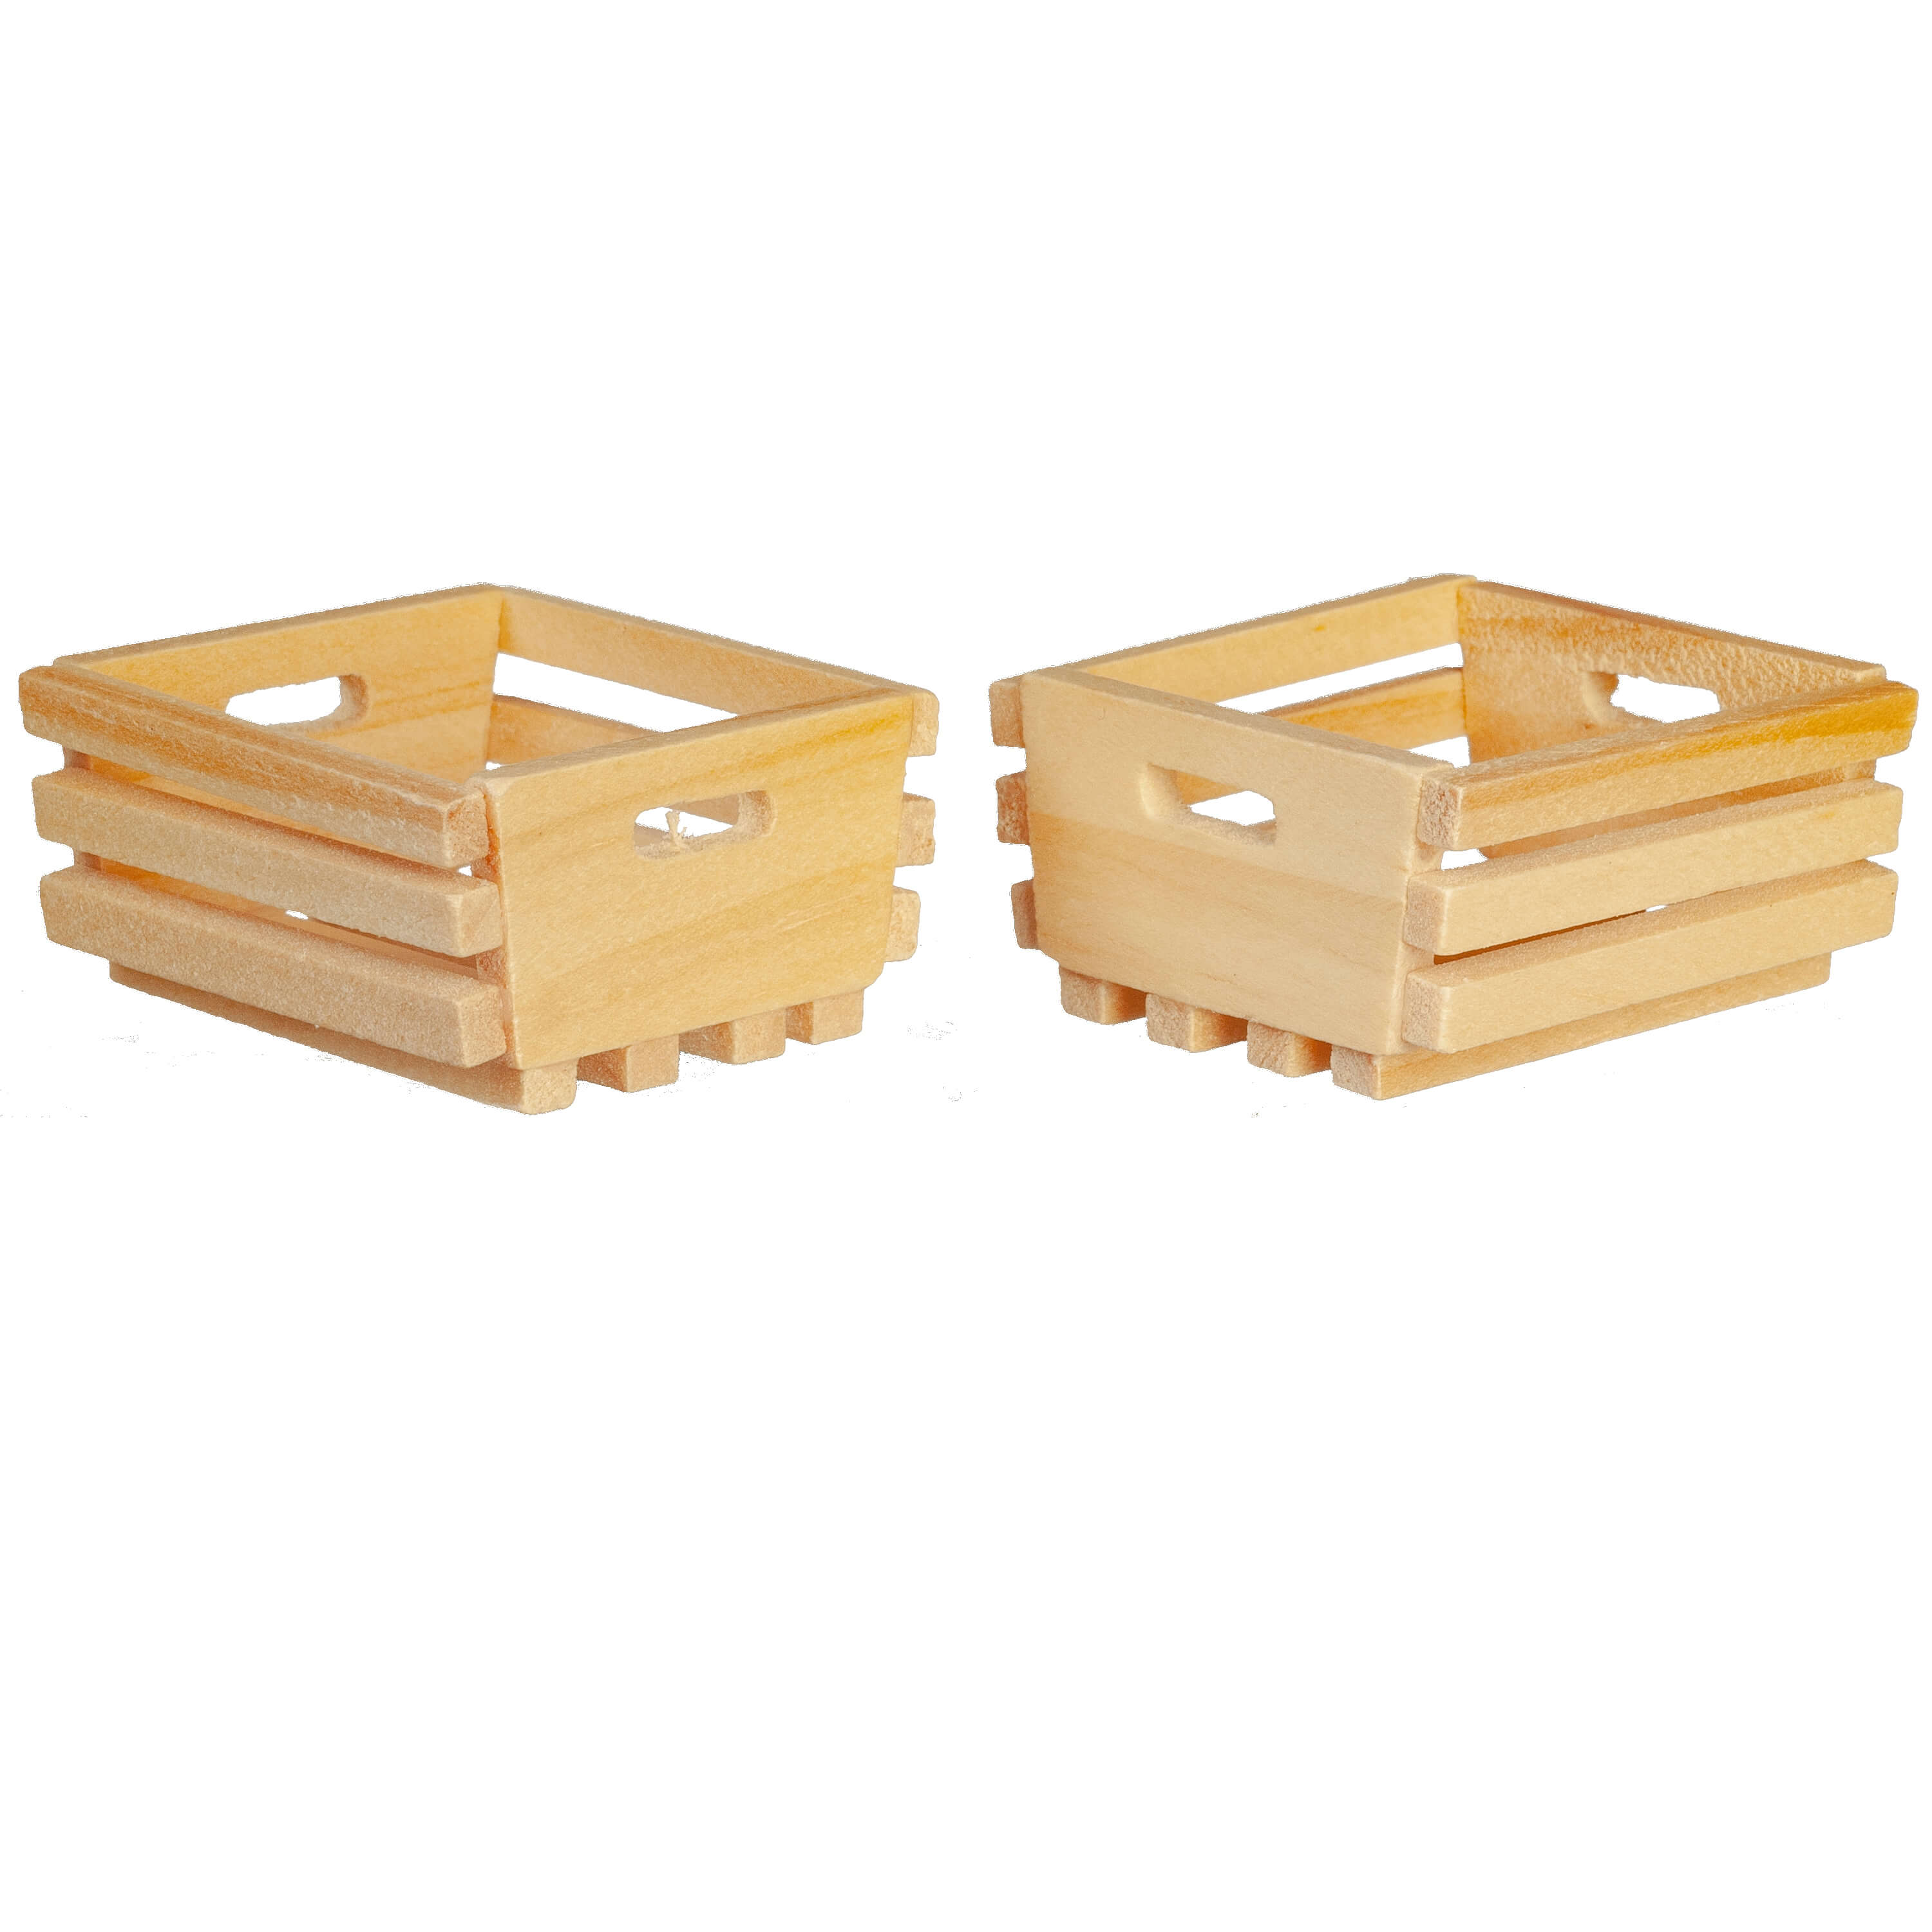 Handled Crate 2pc - Natural